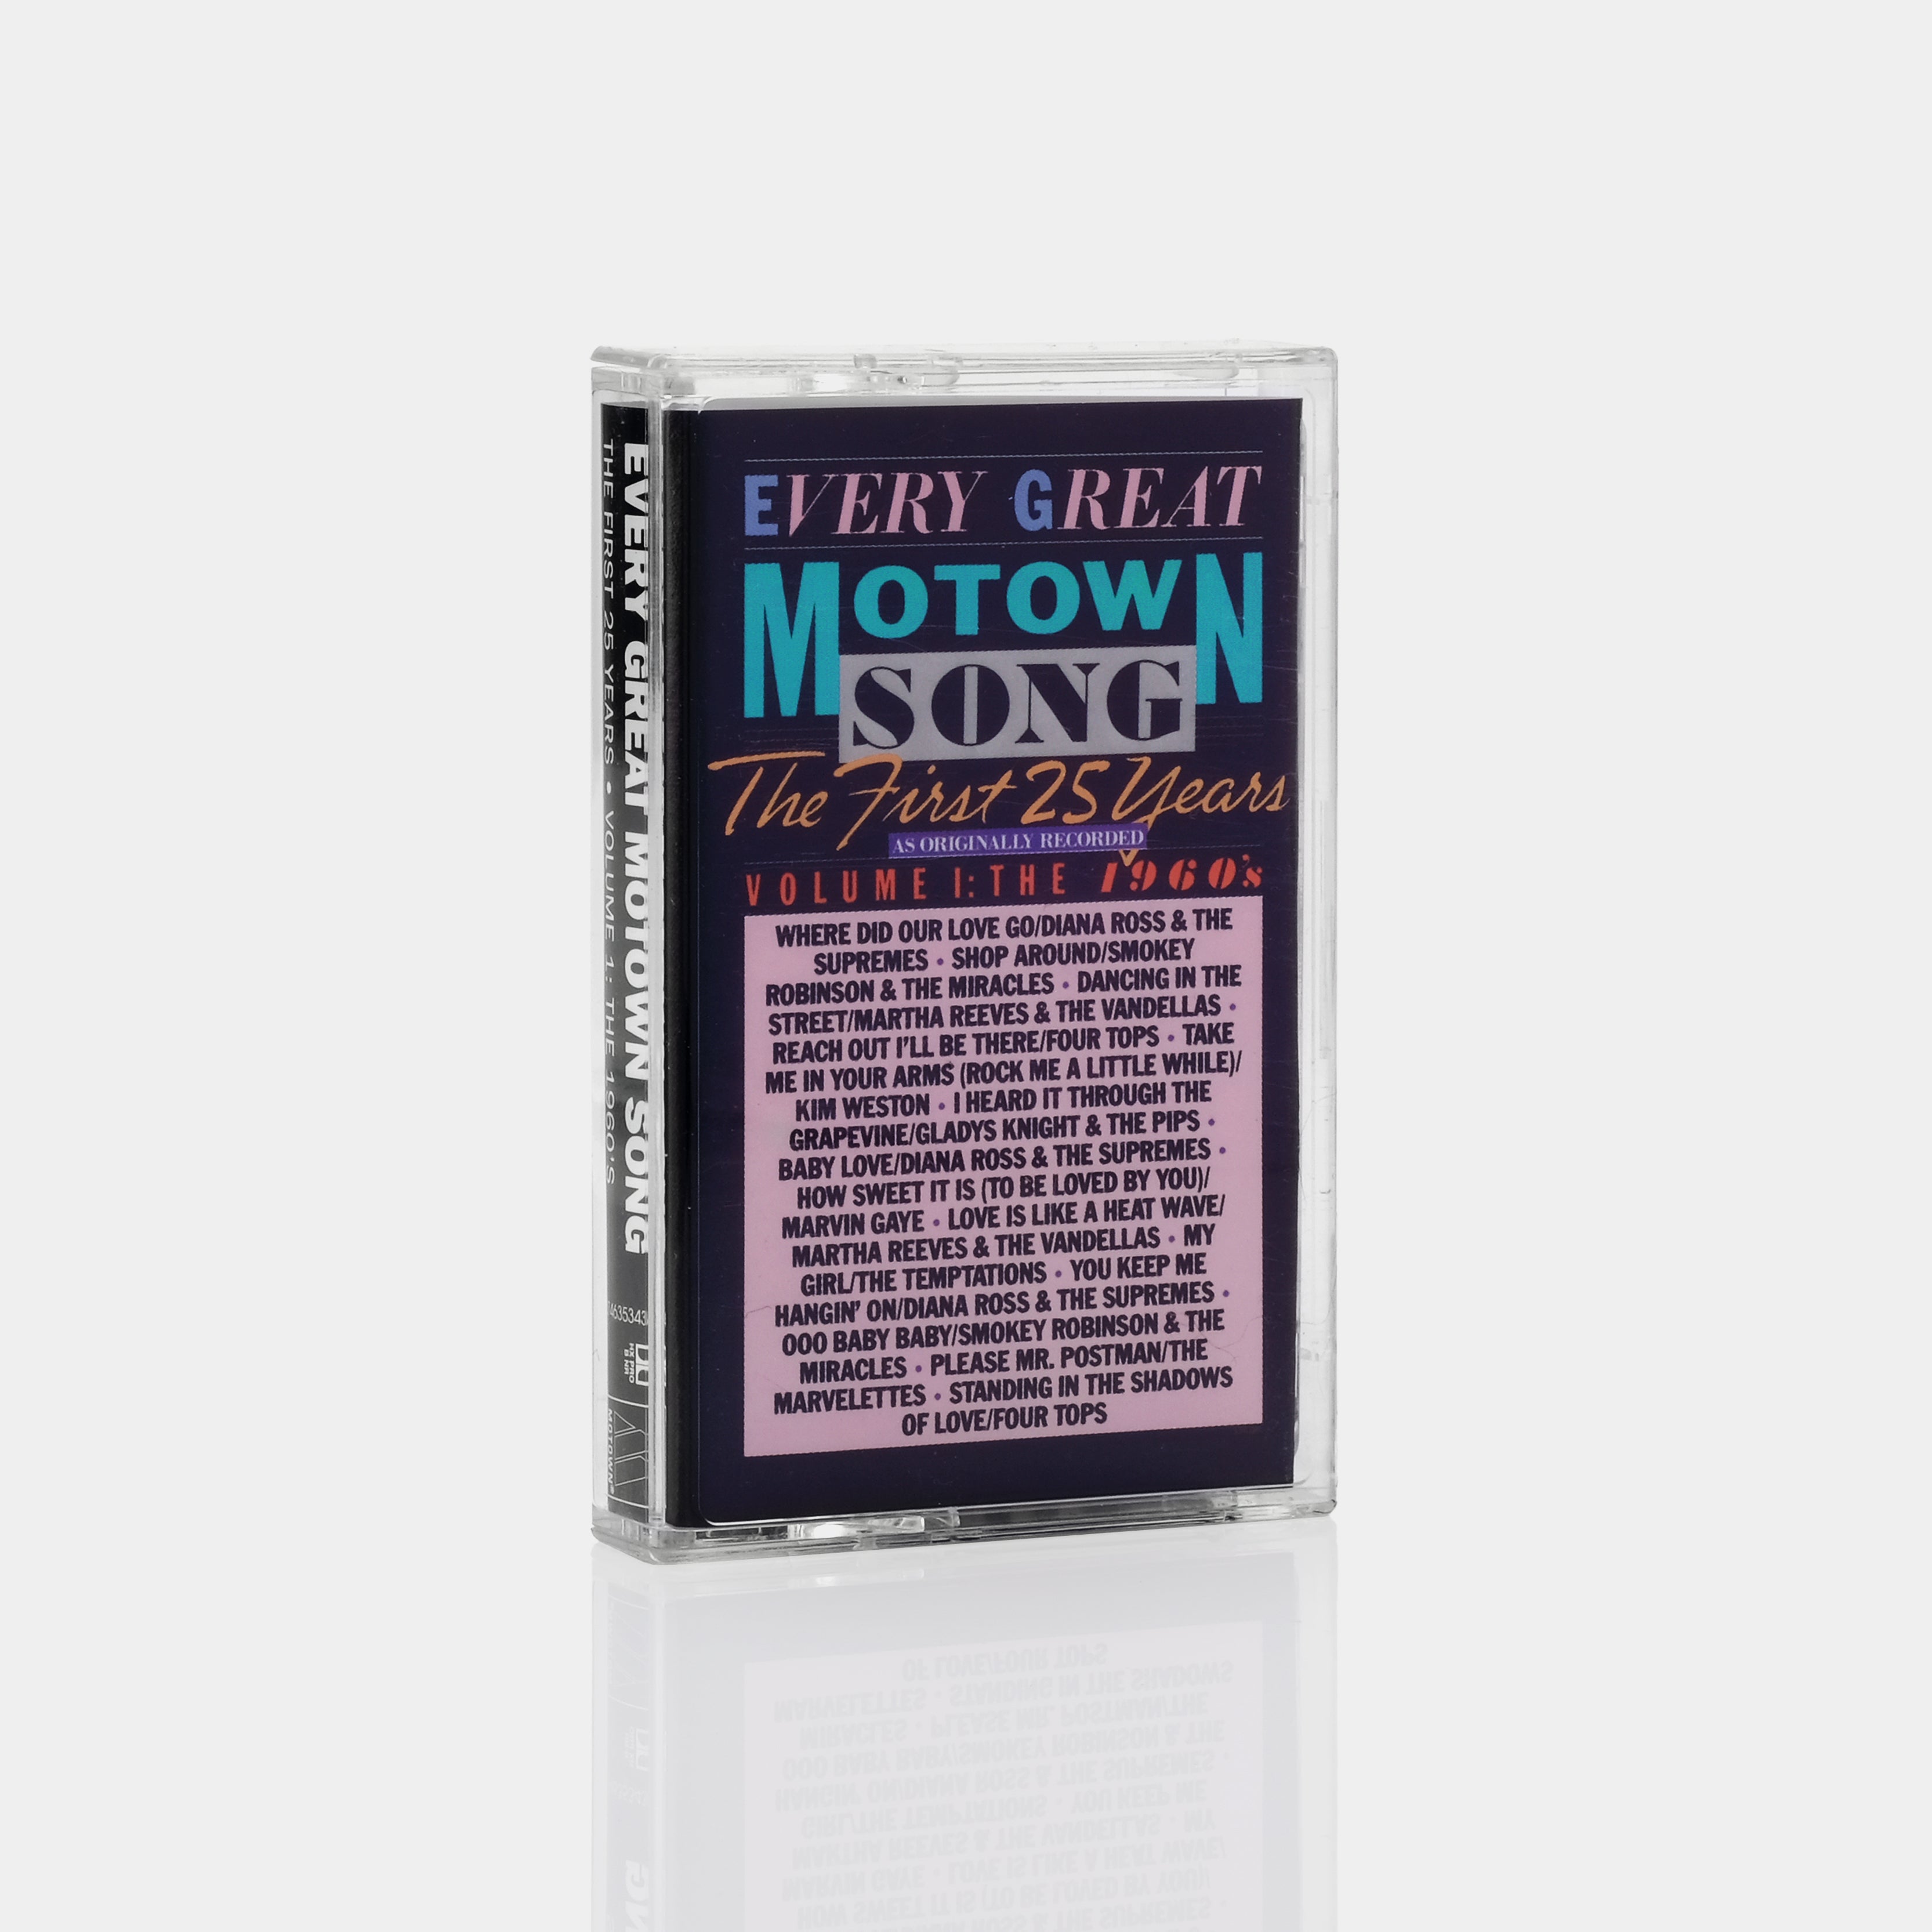 Every Great Motown Song: The First 25 Years - Volume 1: The 1960's Cassette Tape